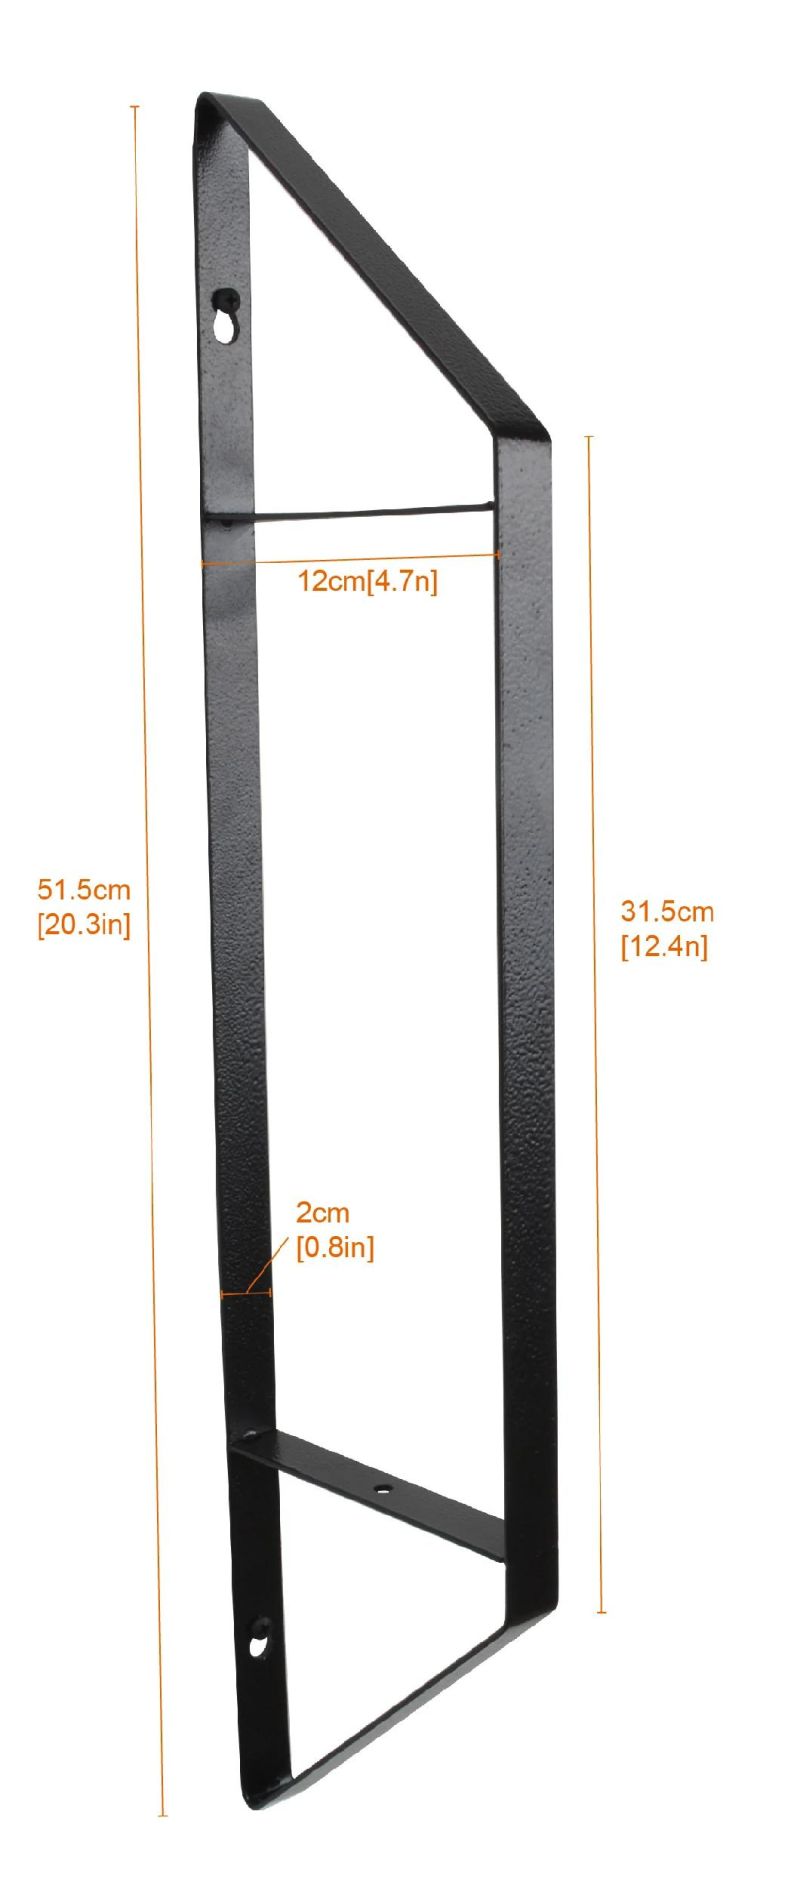 2 Layer Wall Mounted Metal Shelf Bracket with Strong Support